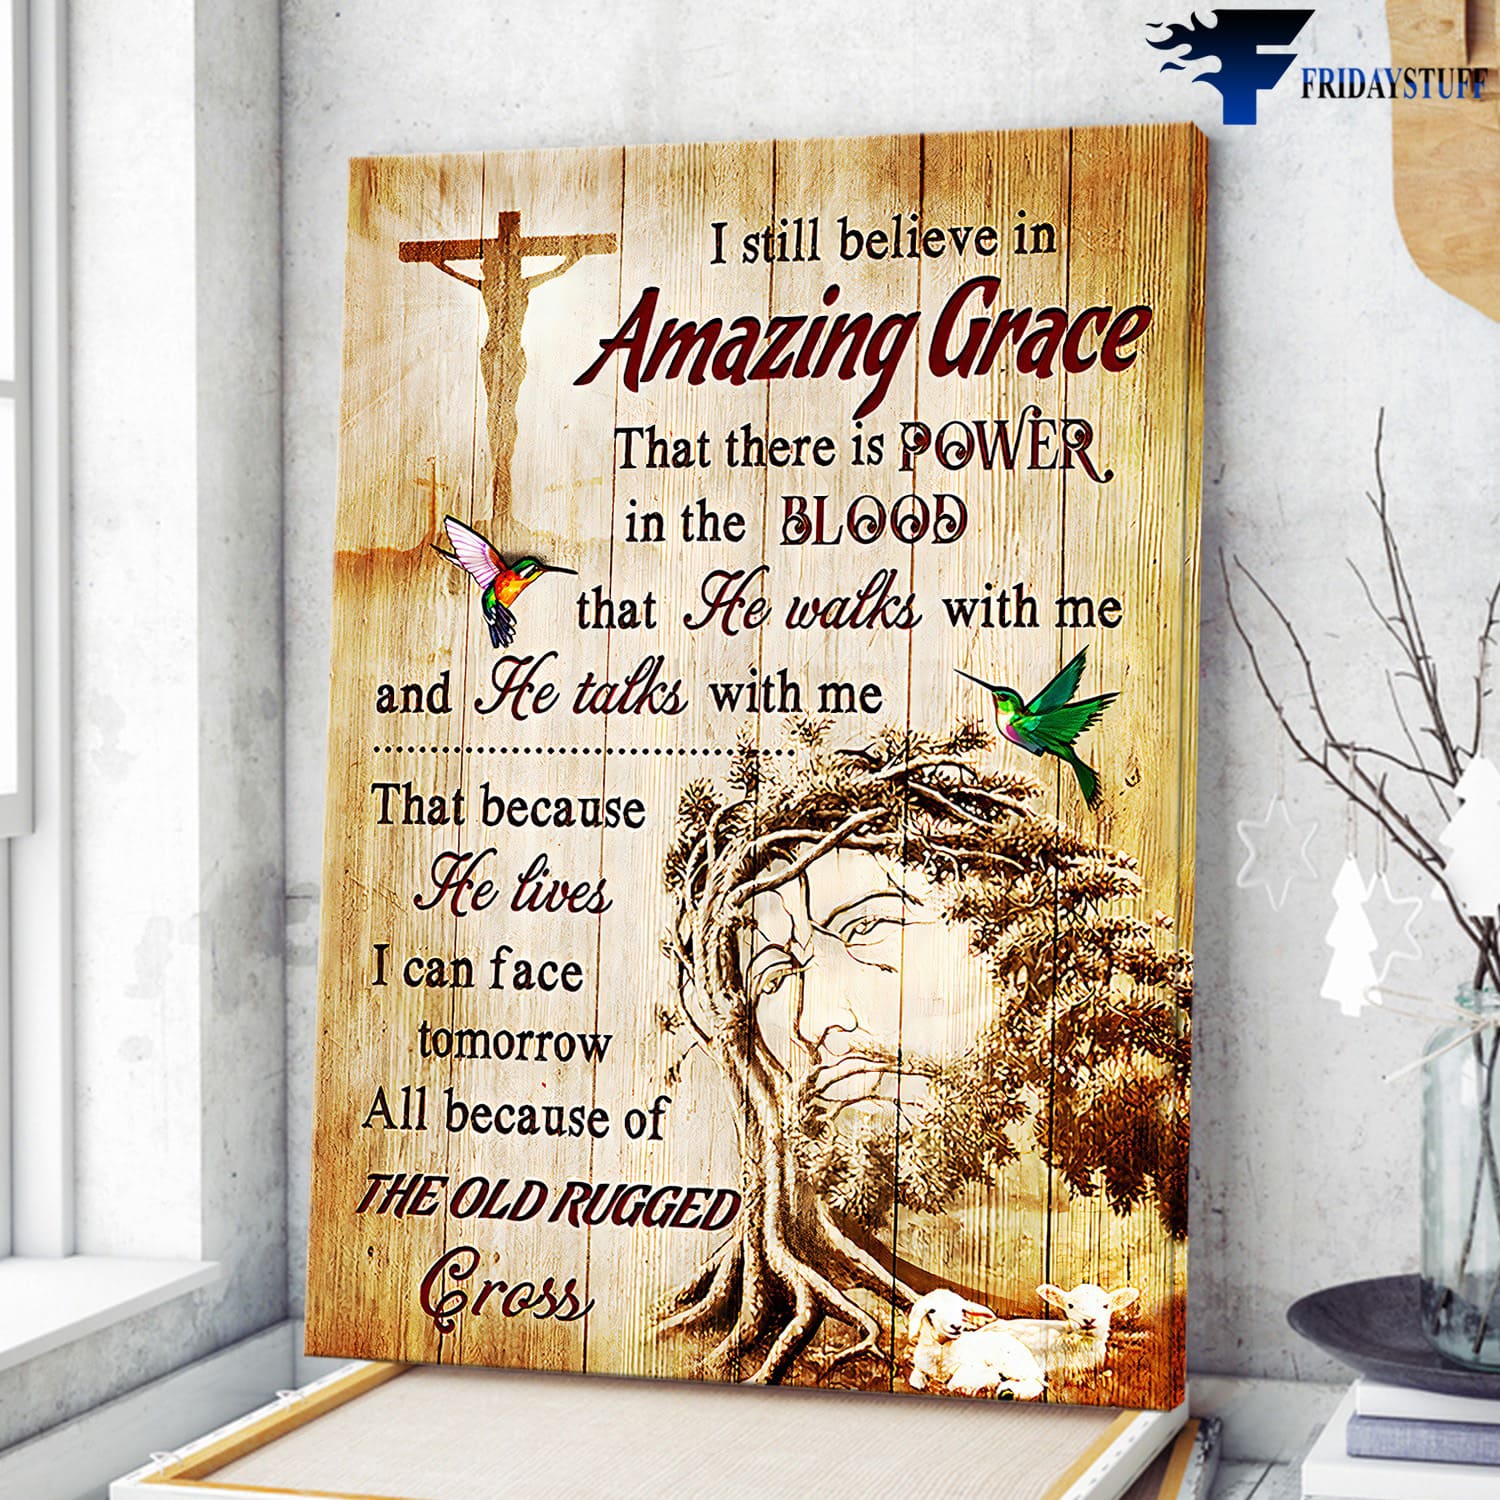 God Poster, Hummingbird God, I Still Believe In Amazing Grace, That There Is Power In The Blood, That He Walks With Me, And He Talks With Me, The Old Rugged Cross